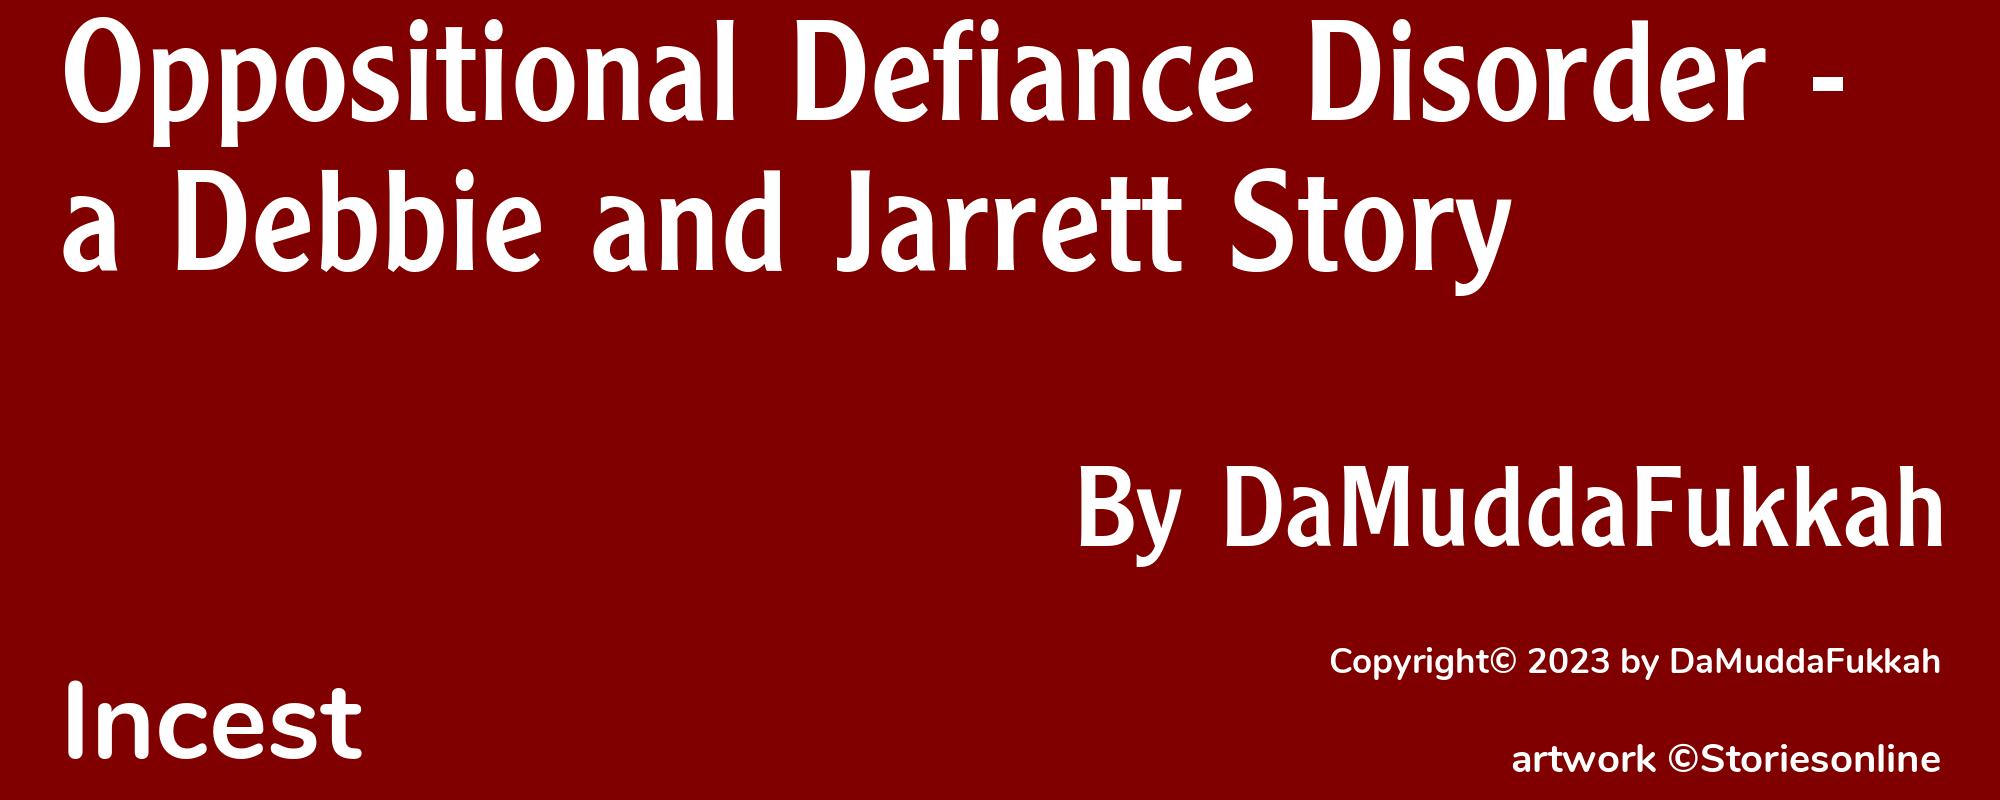 Oppositional Defiance Disorder - a Debbie and Jarrett Story - Cover